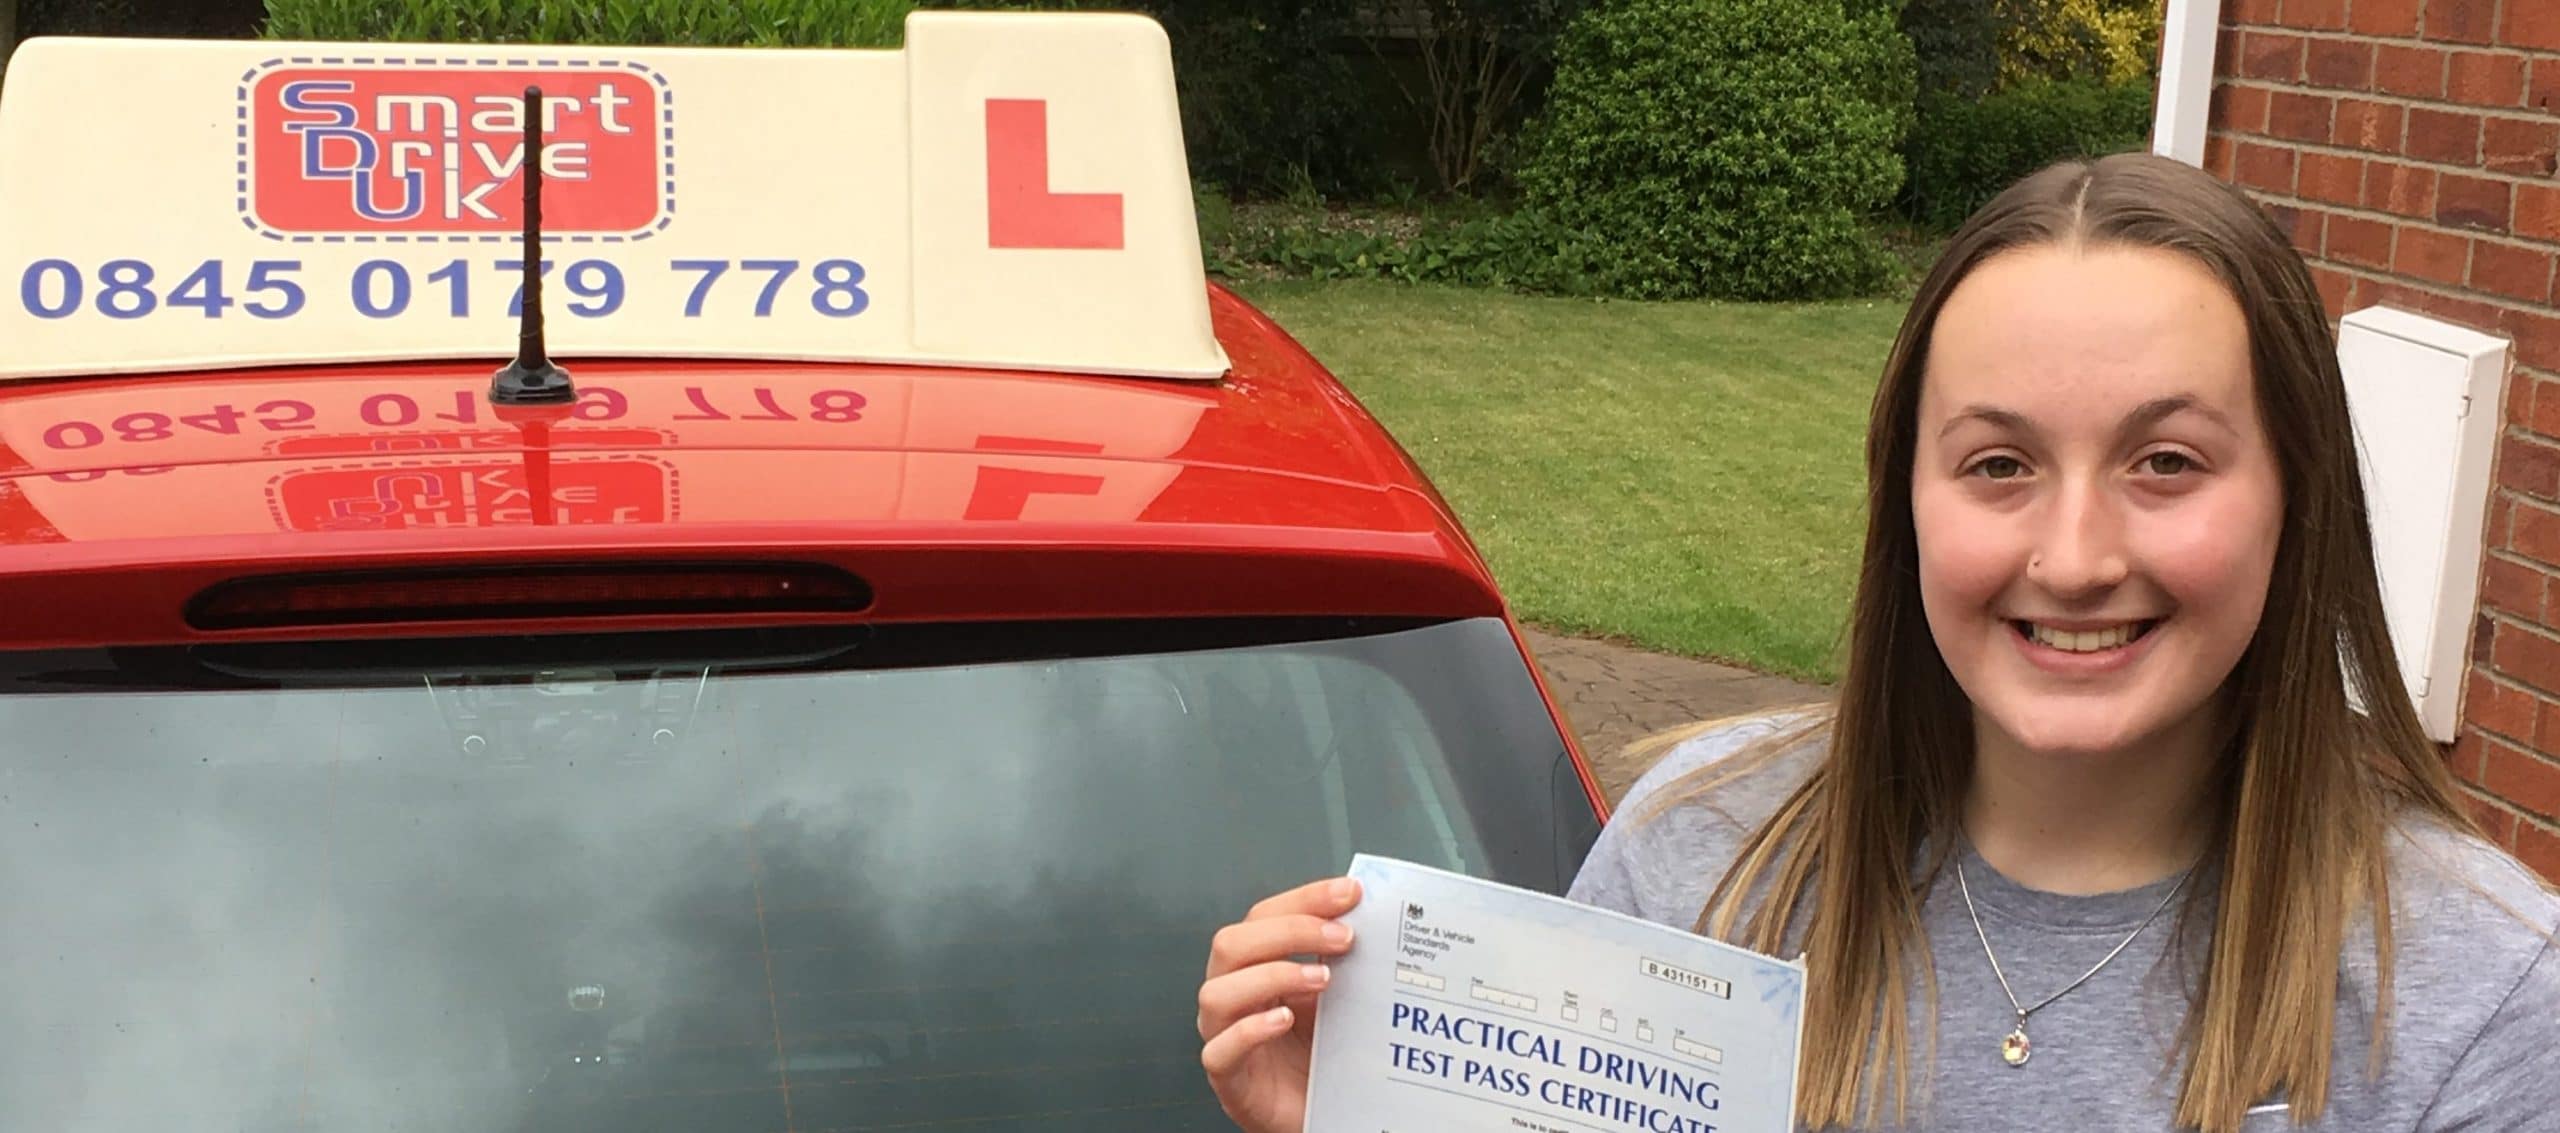 First Time Pass!! Congratulations to Niamh of York